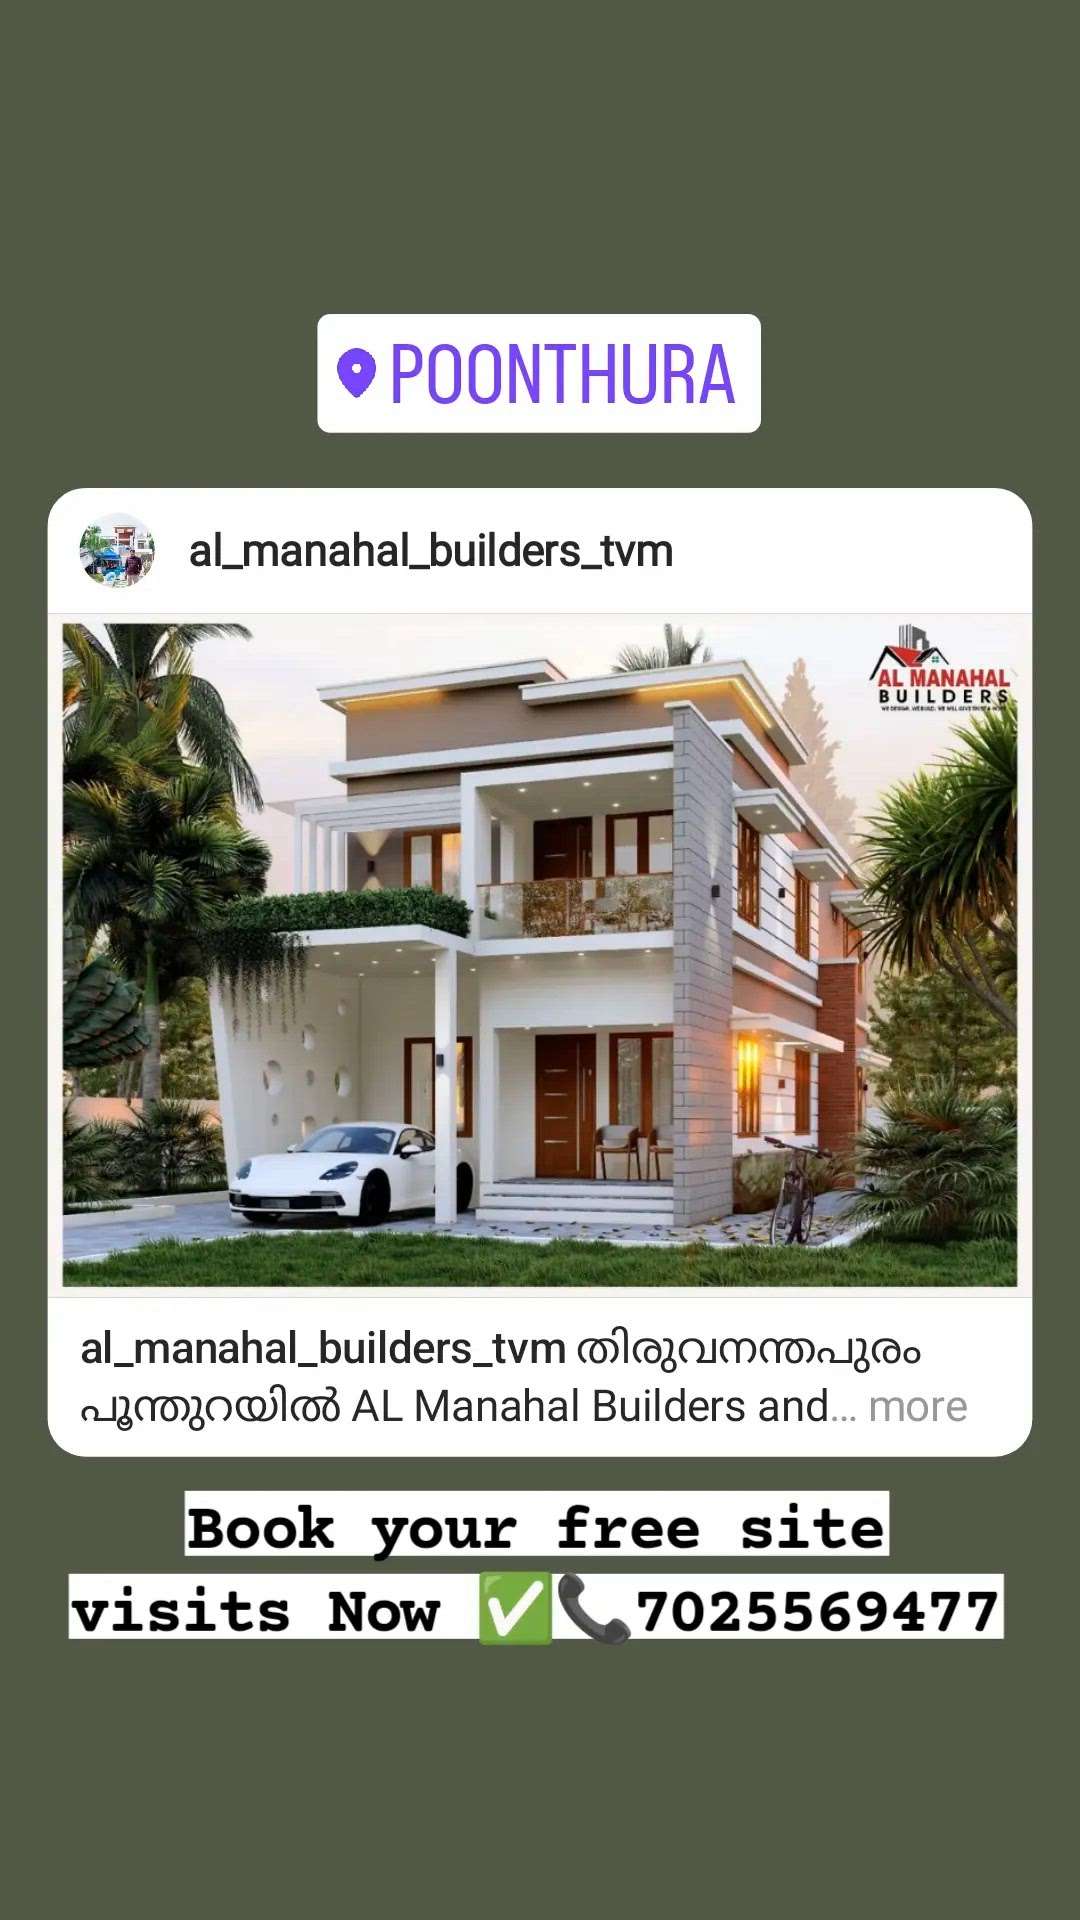 Build your dream home with us ..
Book your free site visits now ✅ 
call 📞 7025569477

 #almanahalbuildersanddevelopers 
#budgethomes
 #ContemporaryHouse